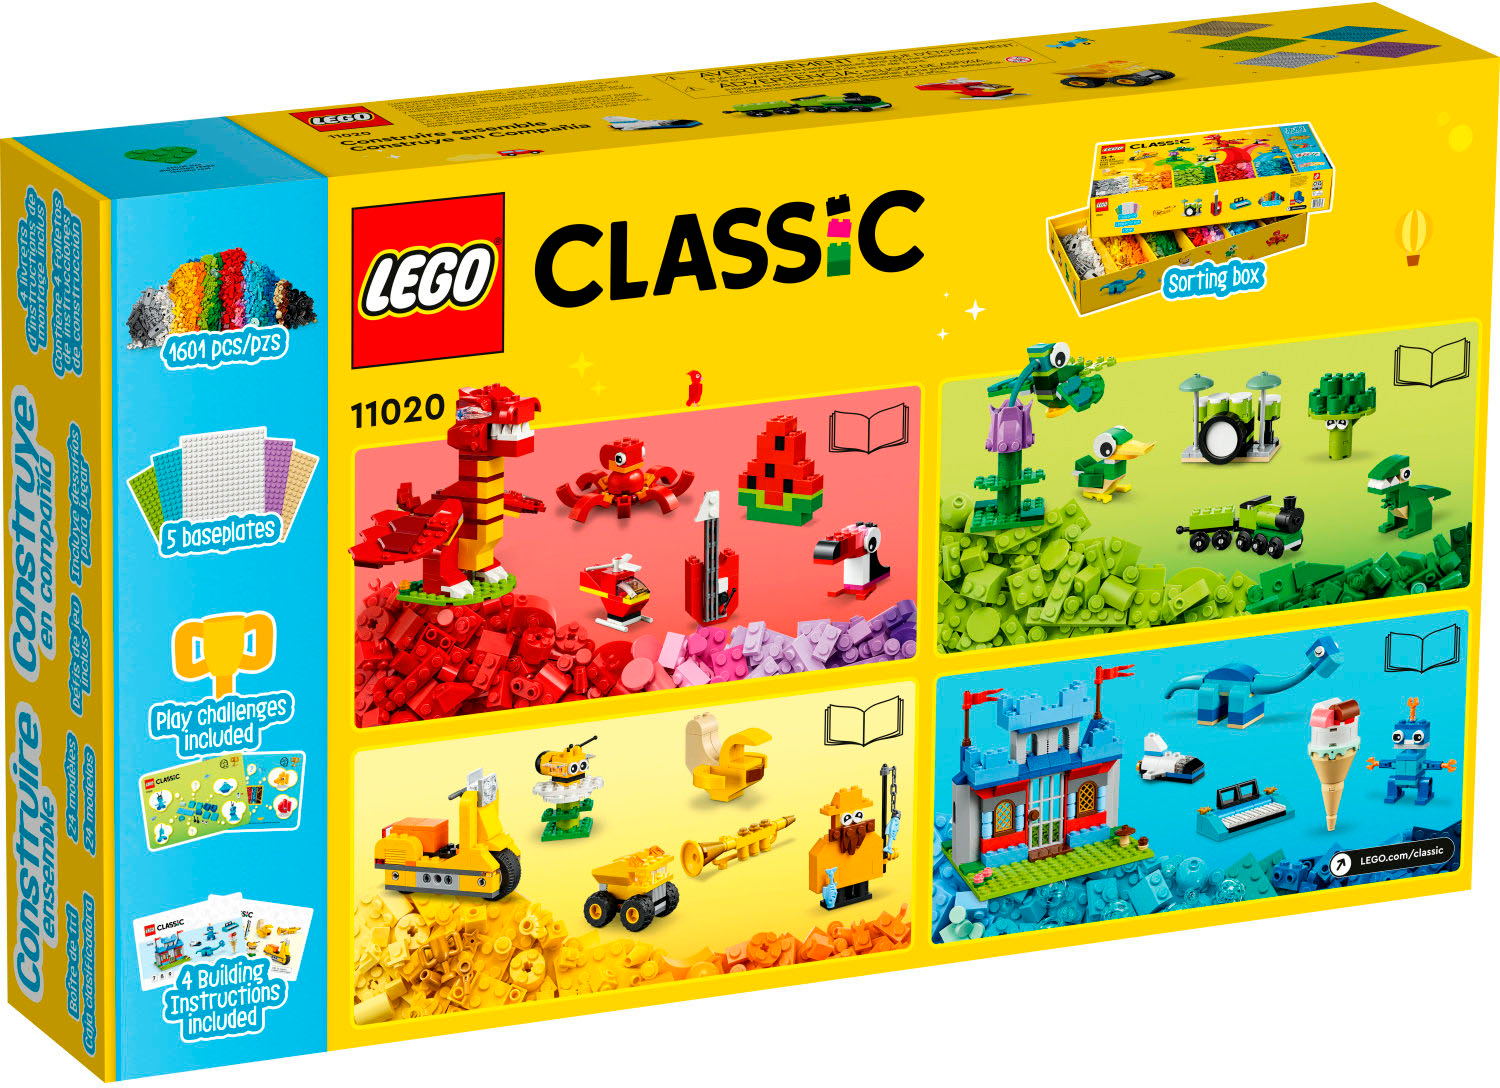 Build Together 11020, Classic